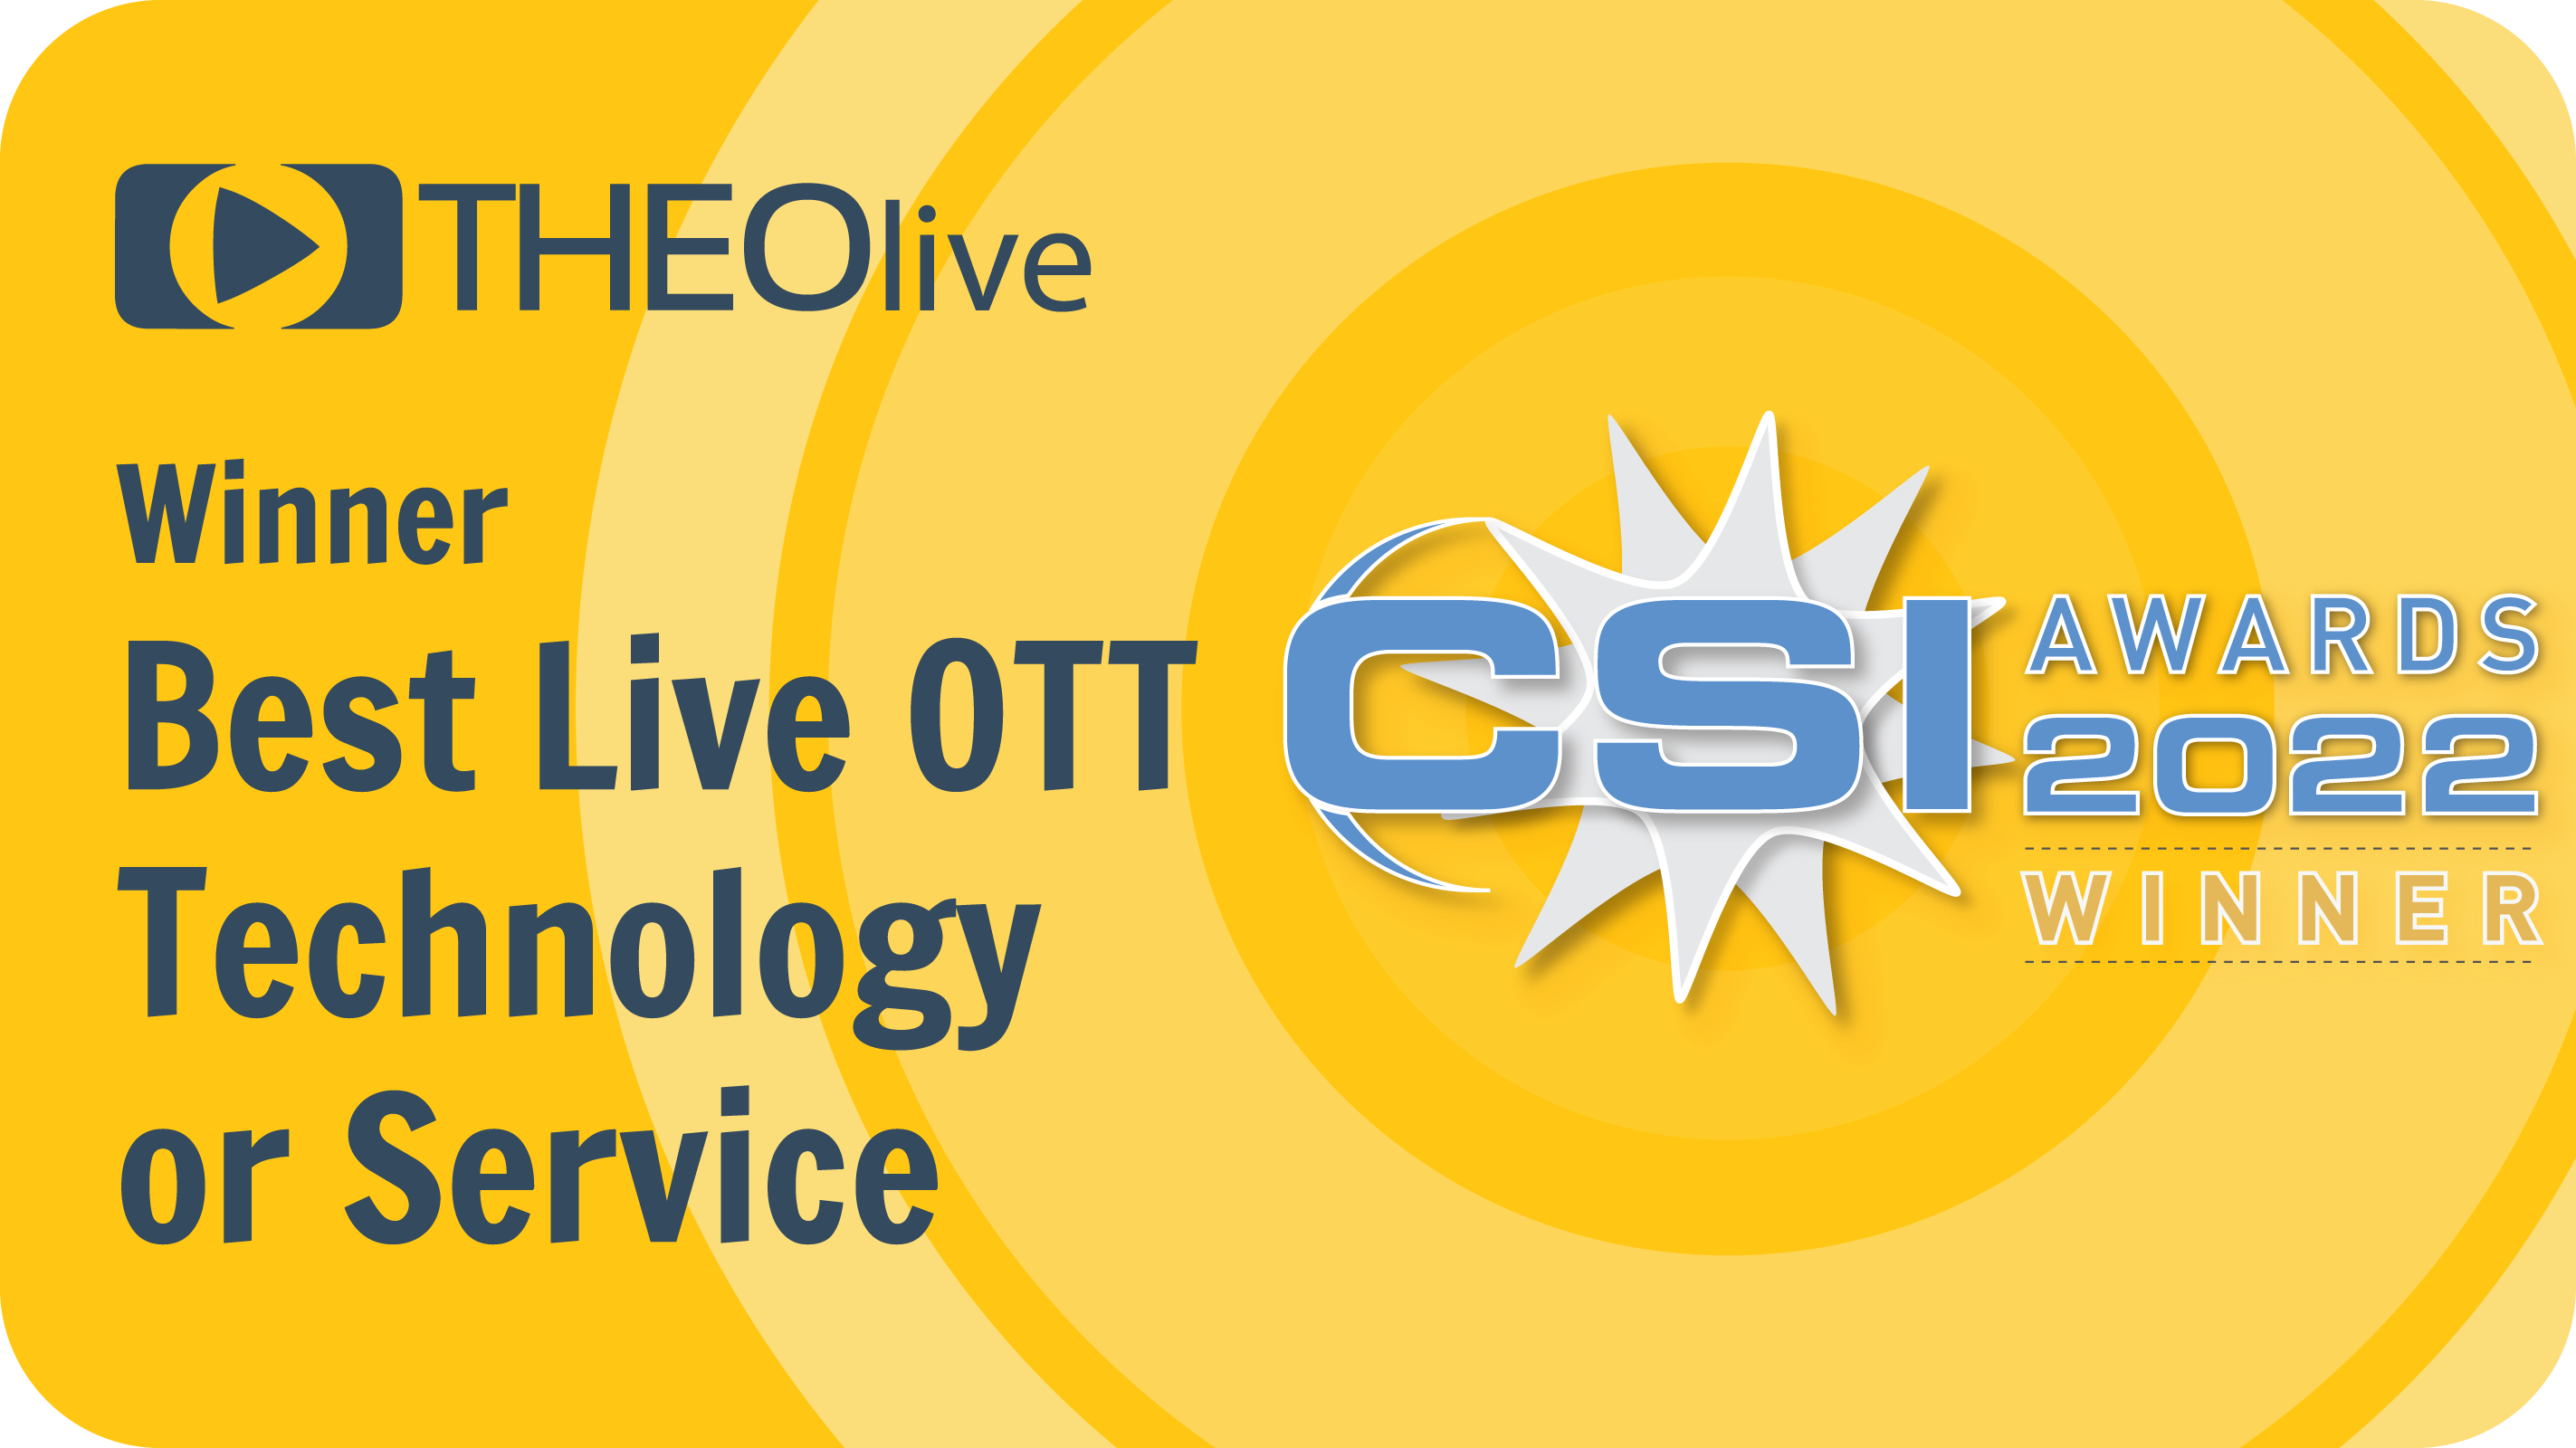 THEOlive wins CSI Award for 'Best Live OTT Technology or Service'